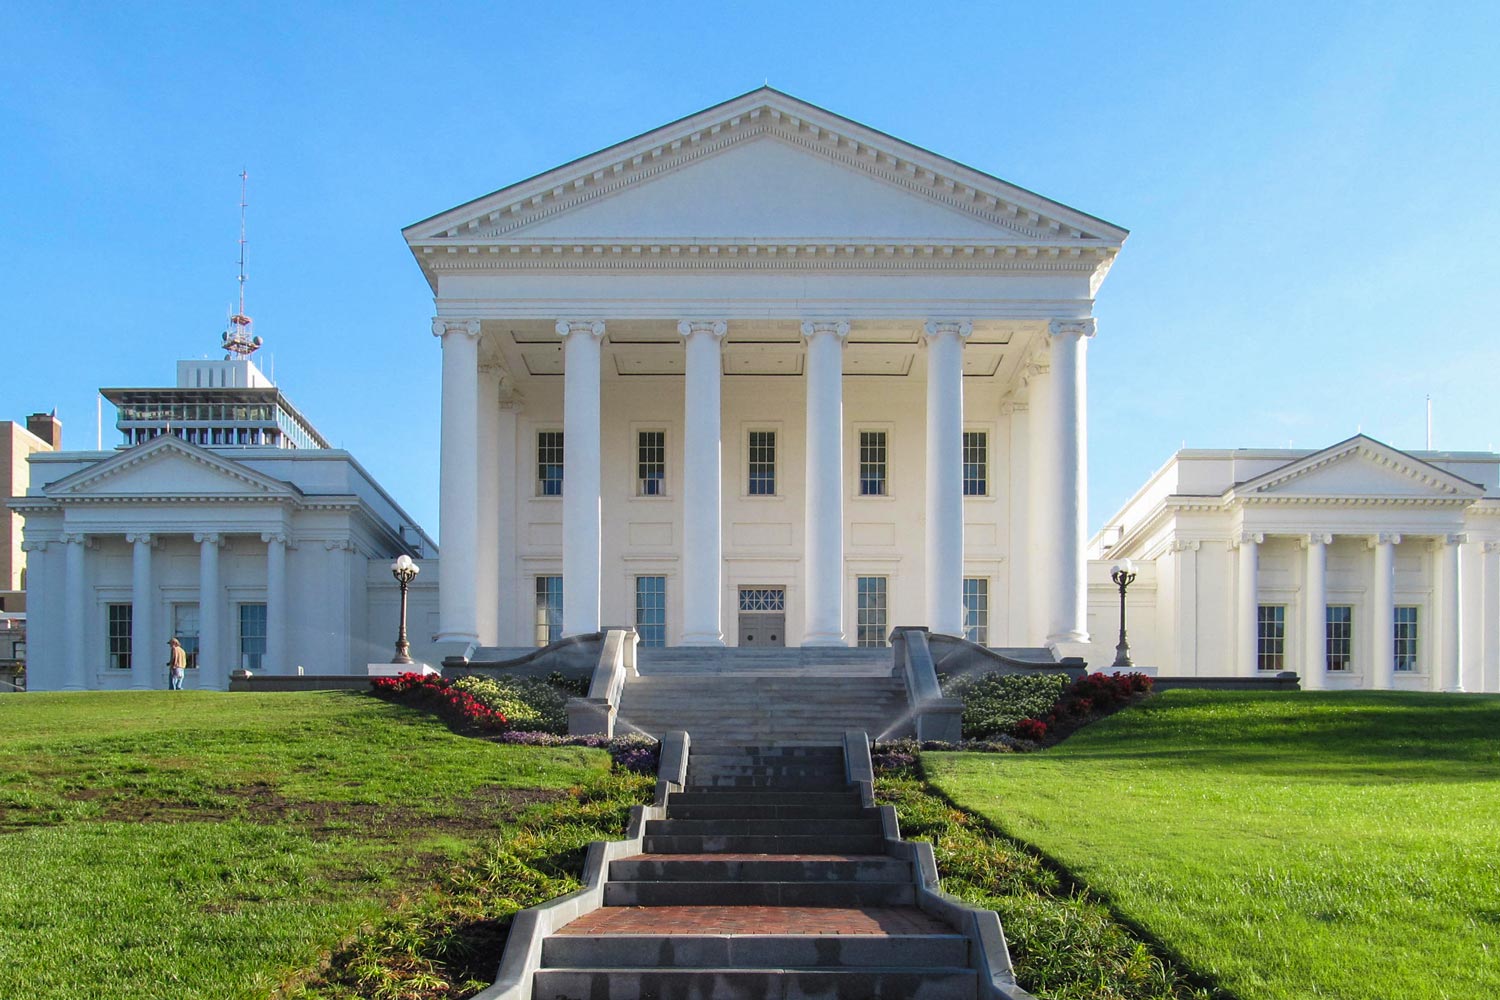 the Virginia State Capitol building with its 6 white columns and two story building